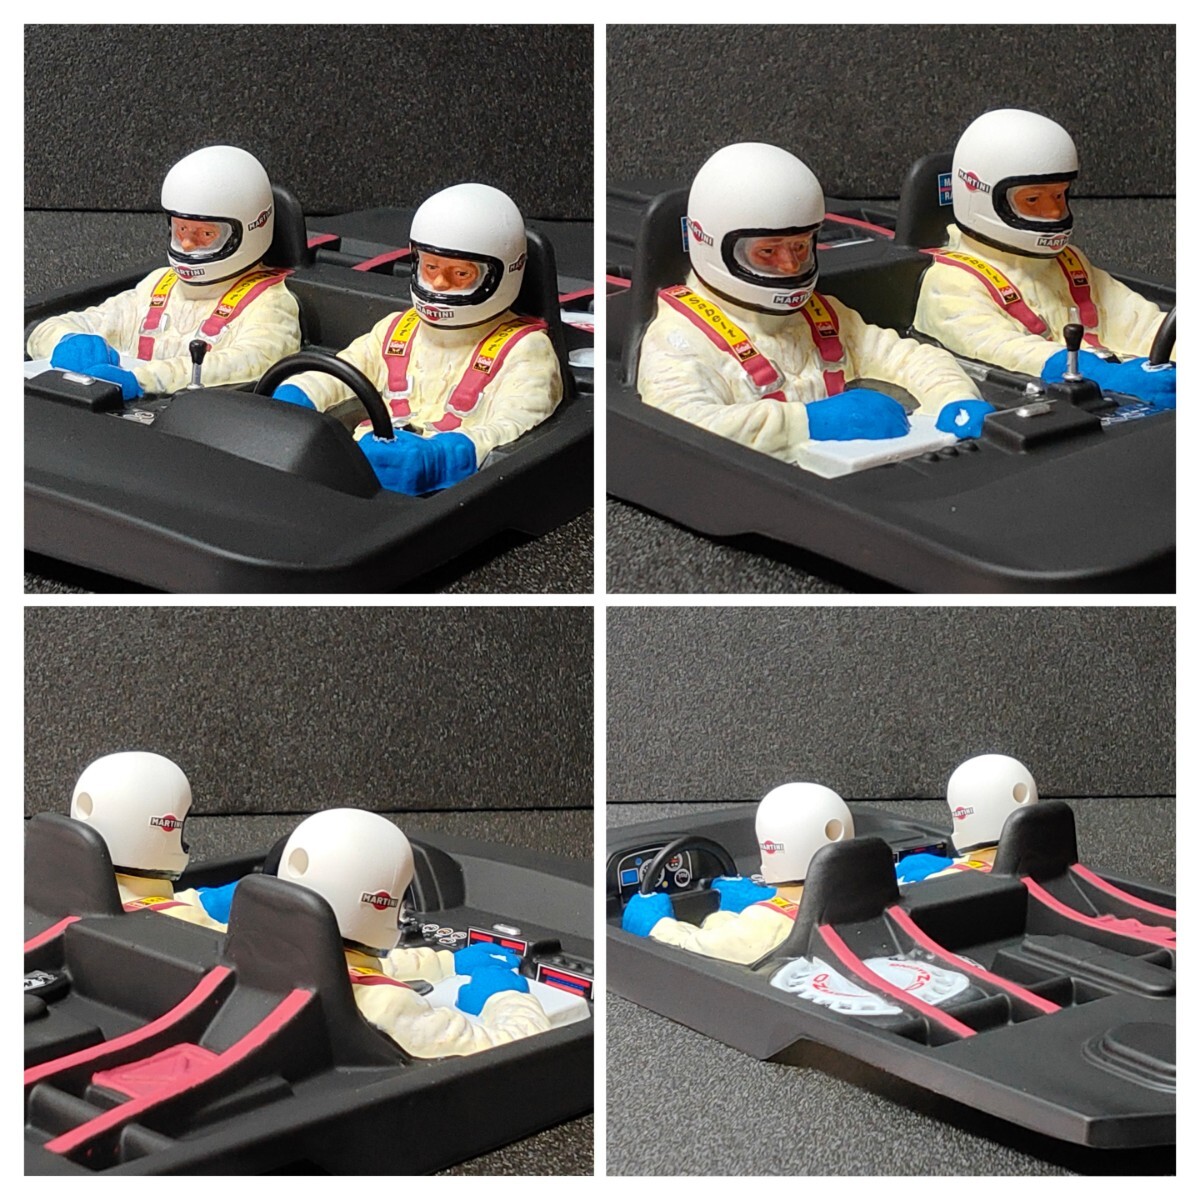 OP.1491 1/10RC ラリーカー コクピットセット 54491 rally car cockpit ラリーカー コクピット 塗装済 組み立て後 未走行 カット済み_画像1